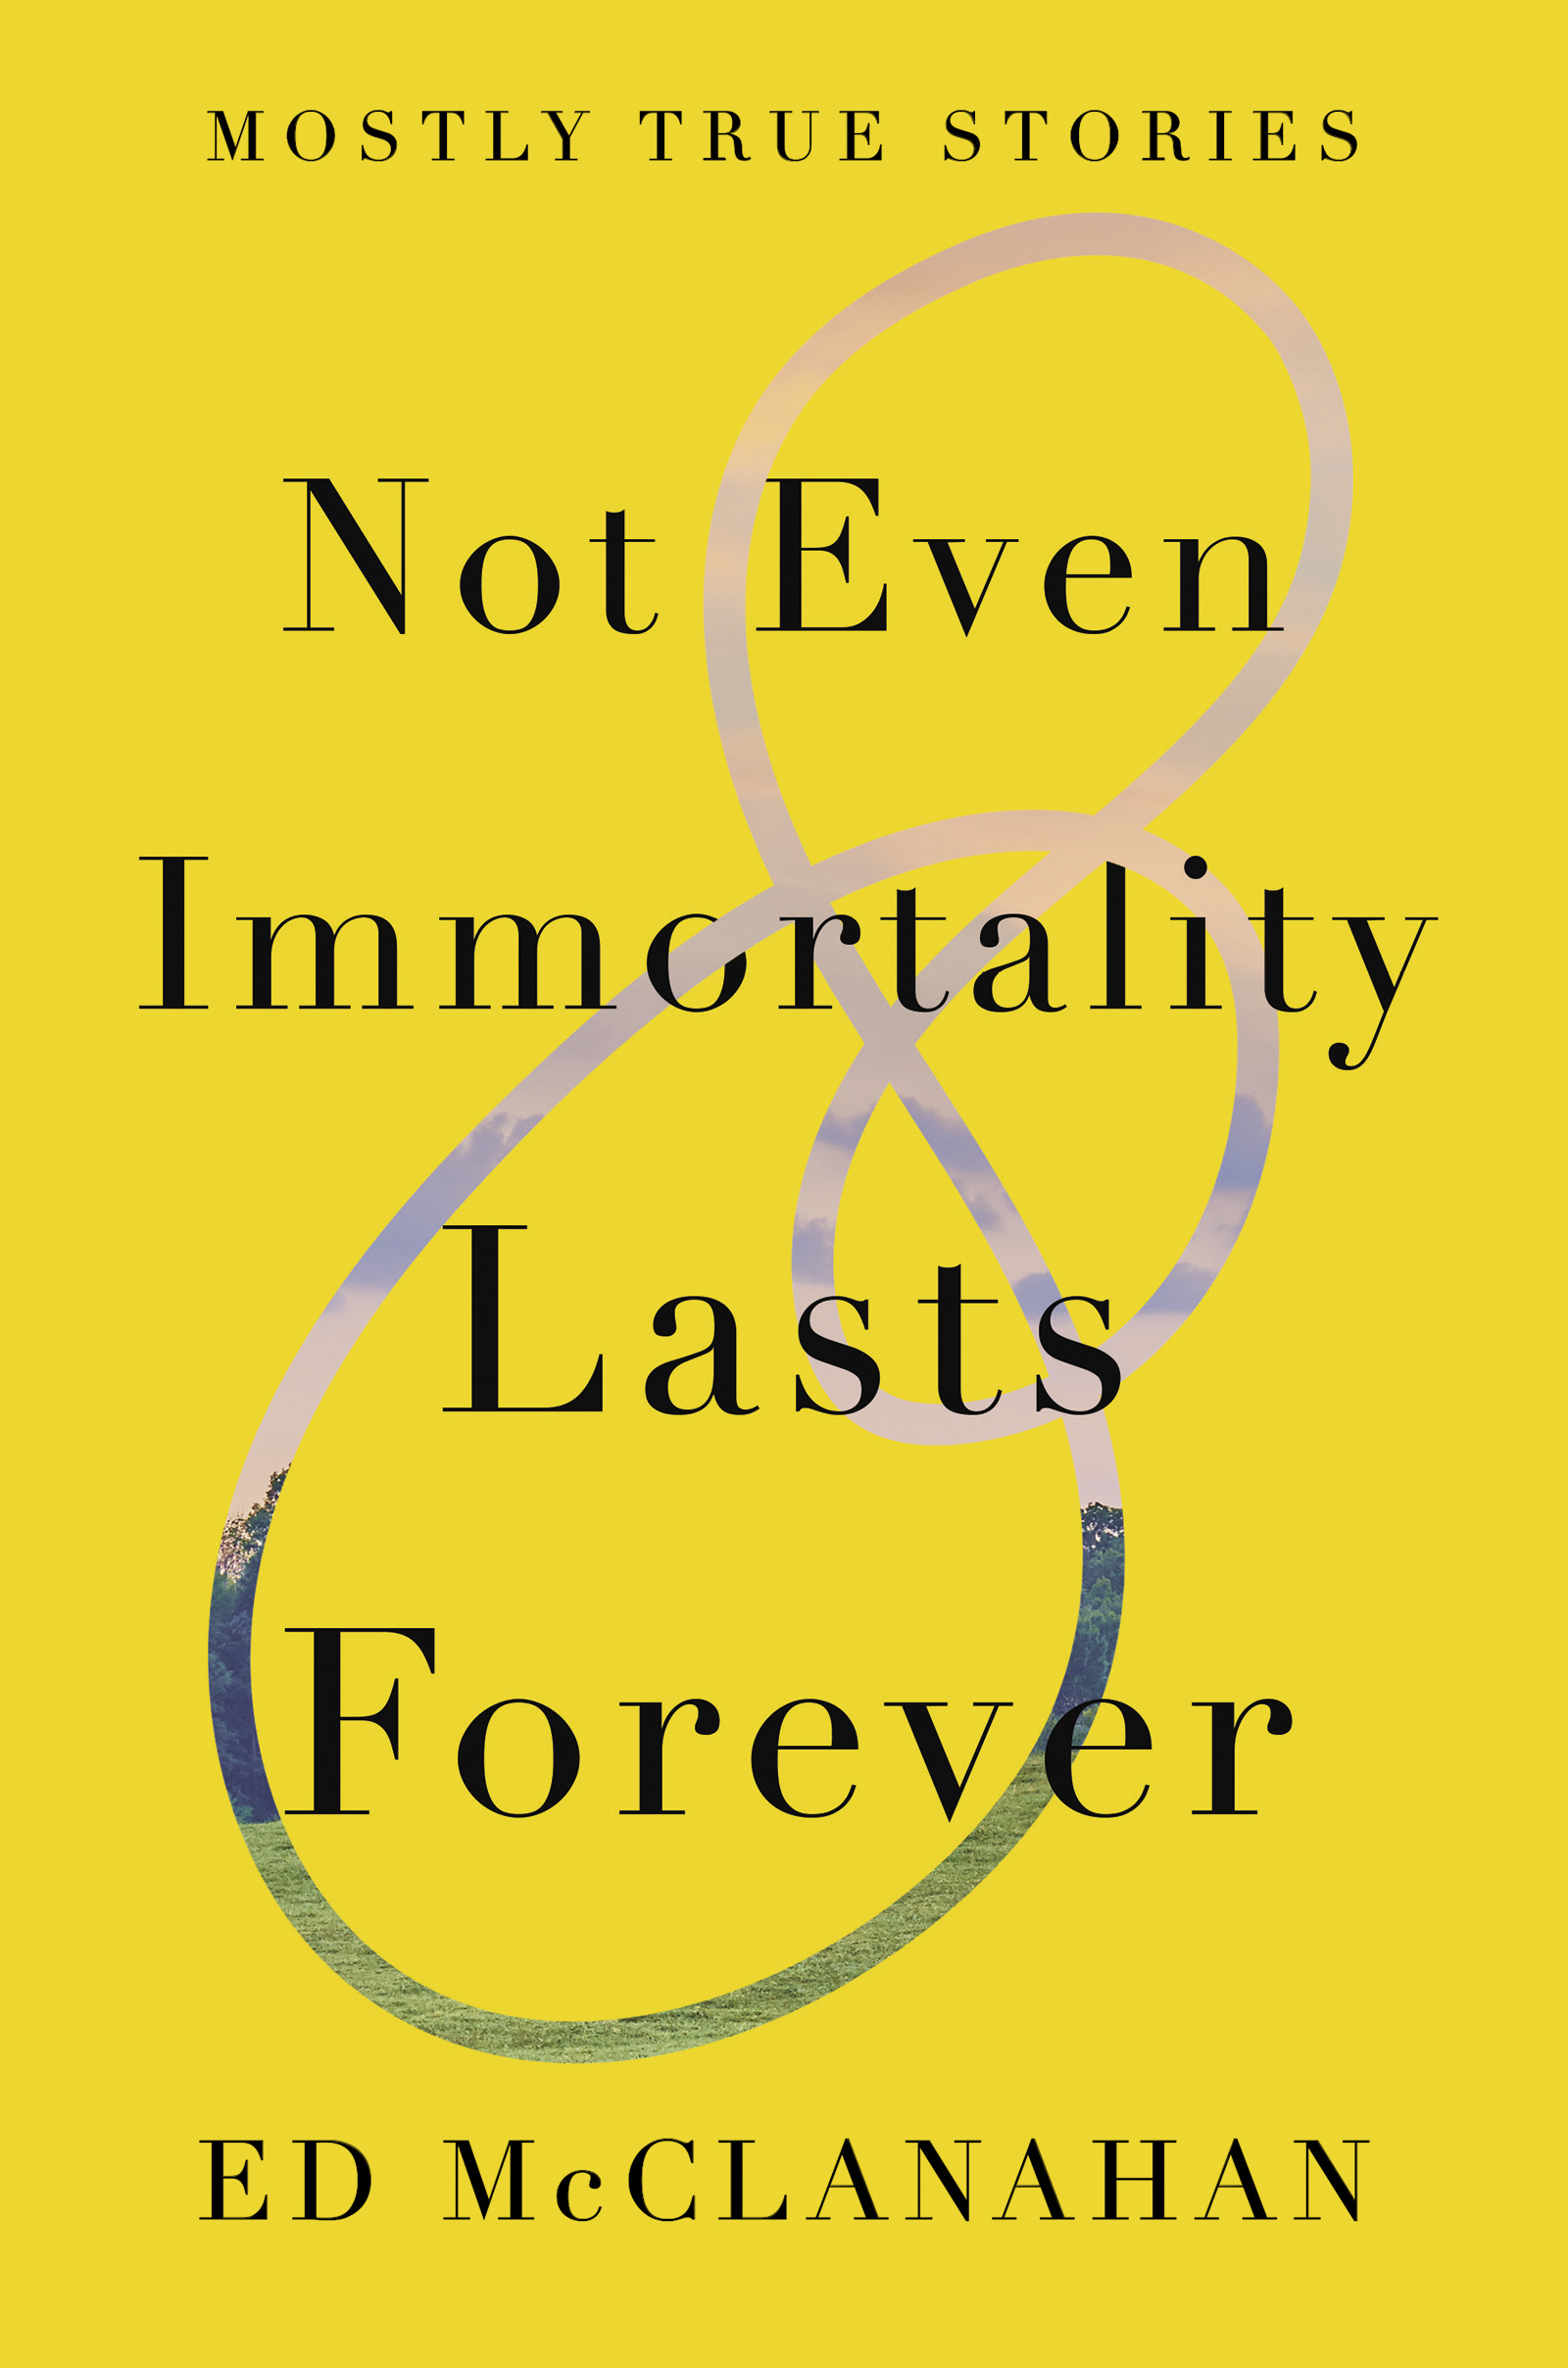 Not Even Immortality Lasts Forever